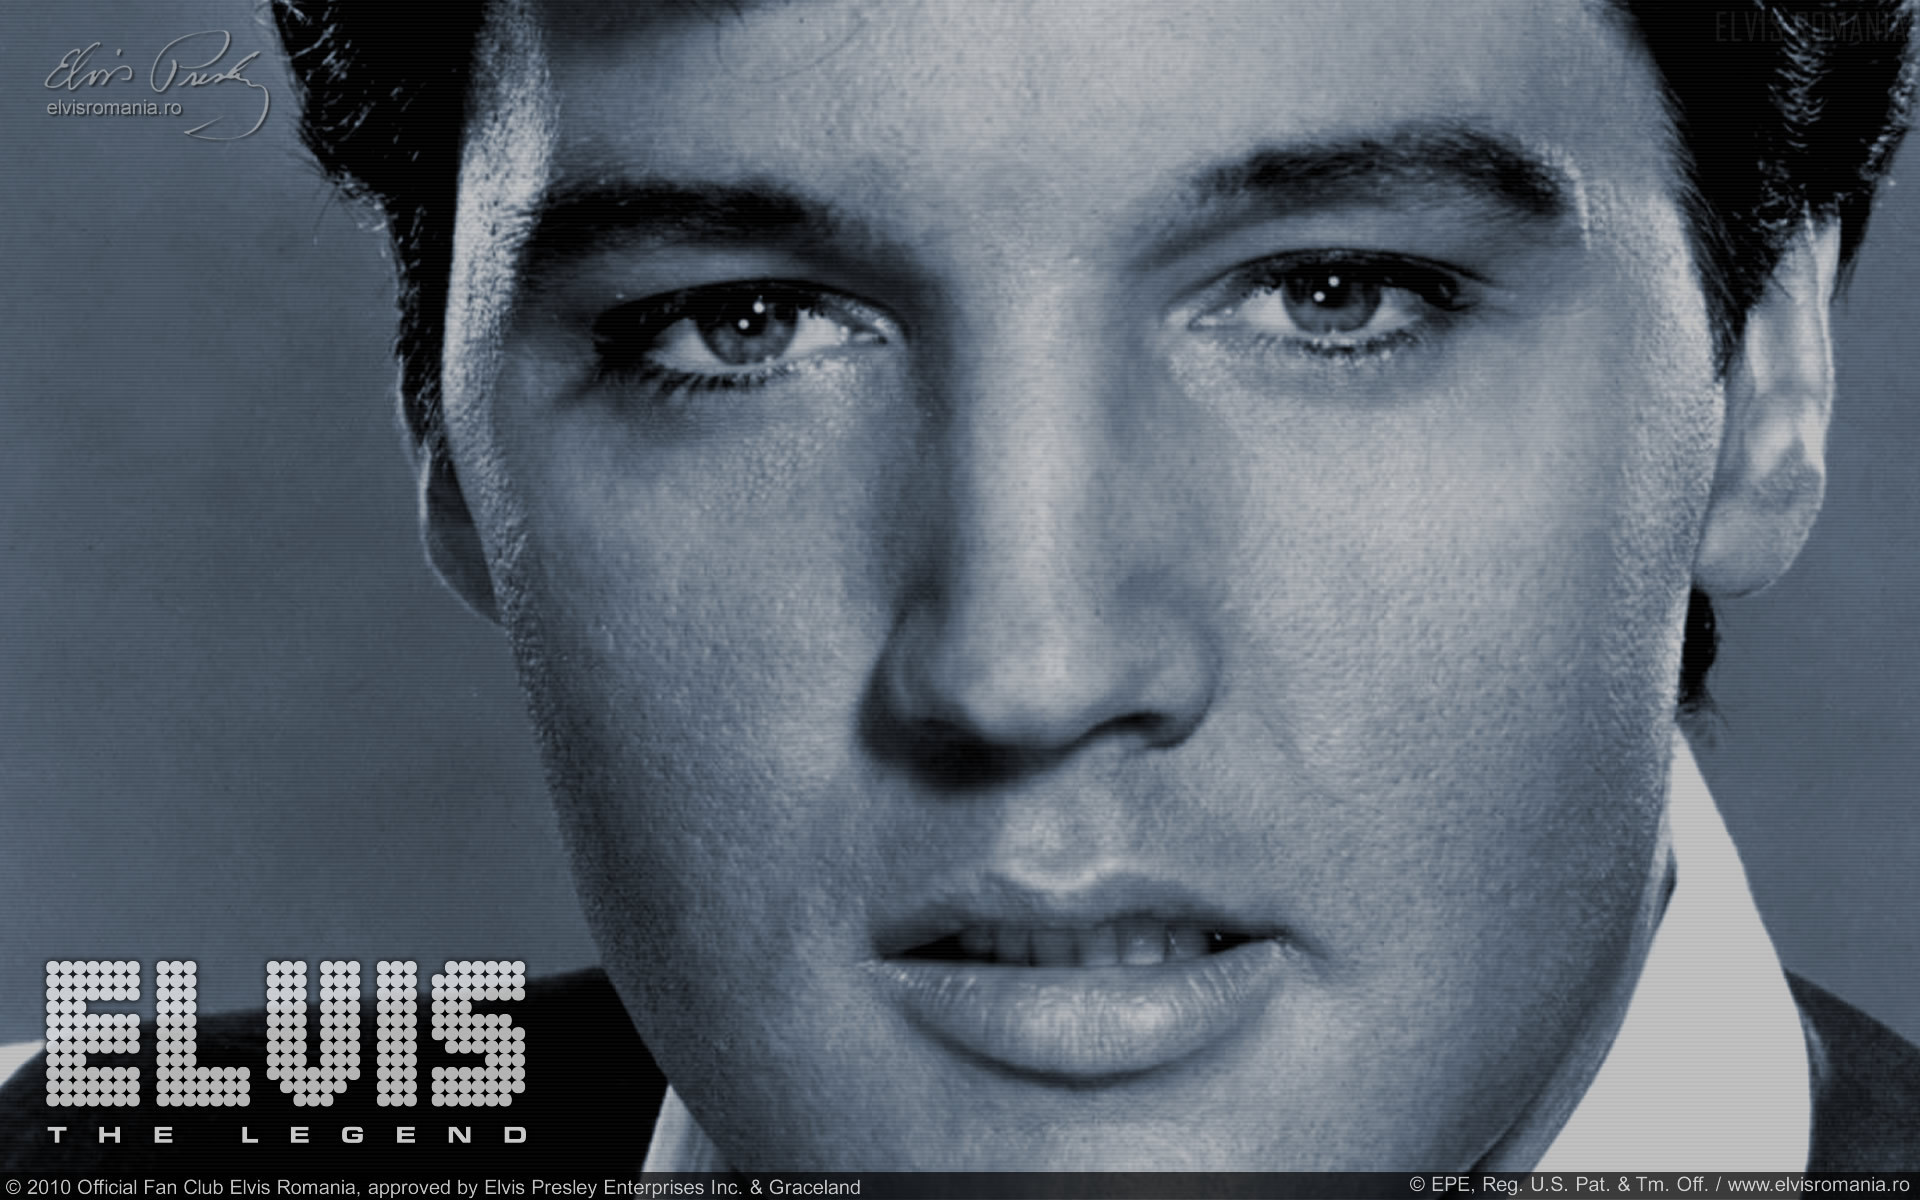 Elvis with an electric hollow elvis presley iphone HD phone wallpaper   Pxfuel